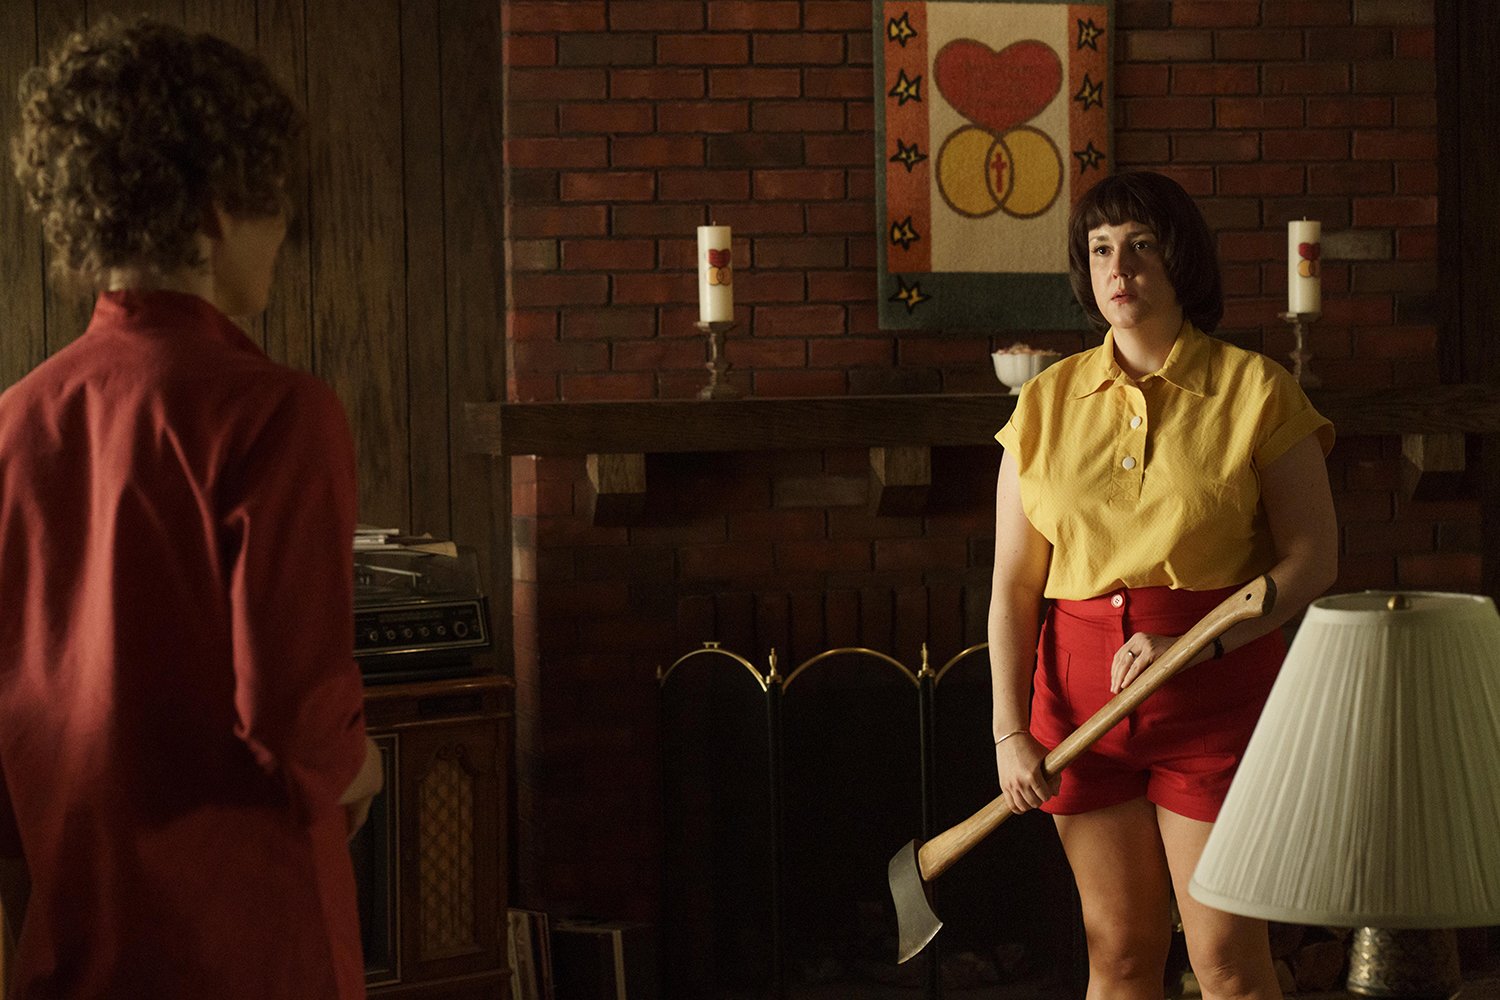 Jessica Biel as Candy Montgomery and Melanie Lynskey as Betty Gore, who holds an axe for the fight scene in 'Candy' Episode 5.